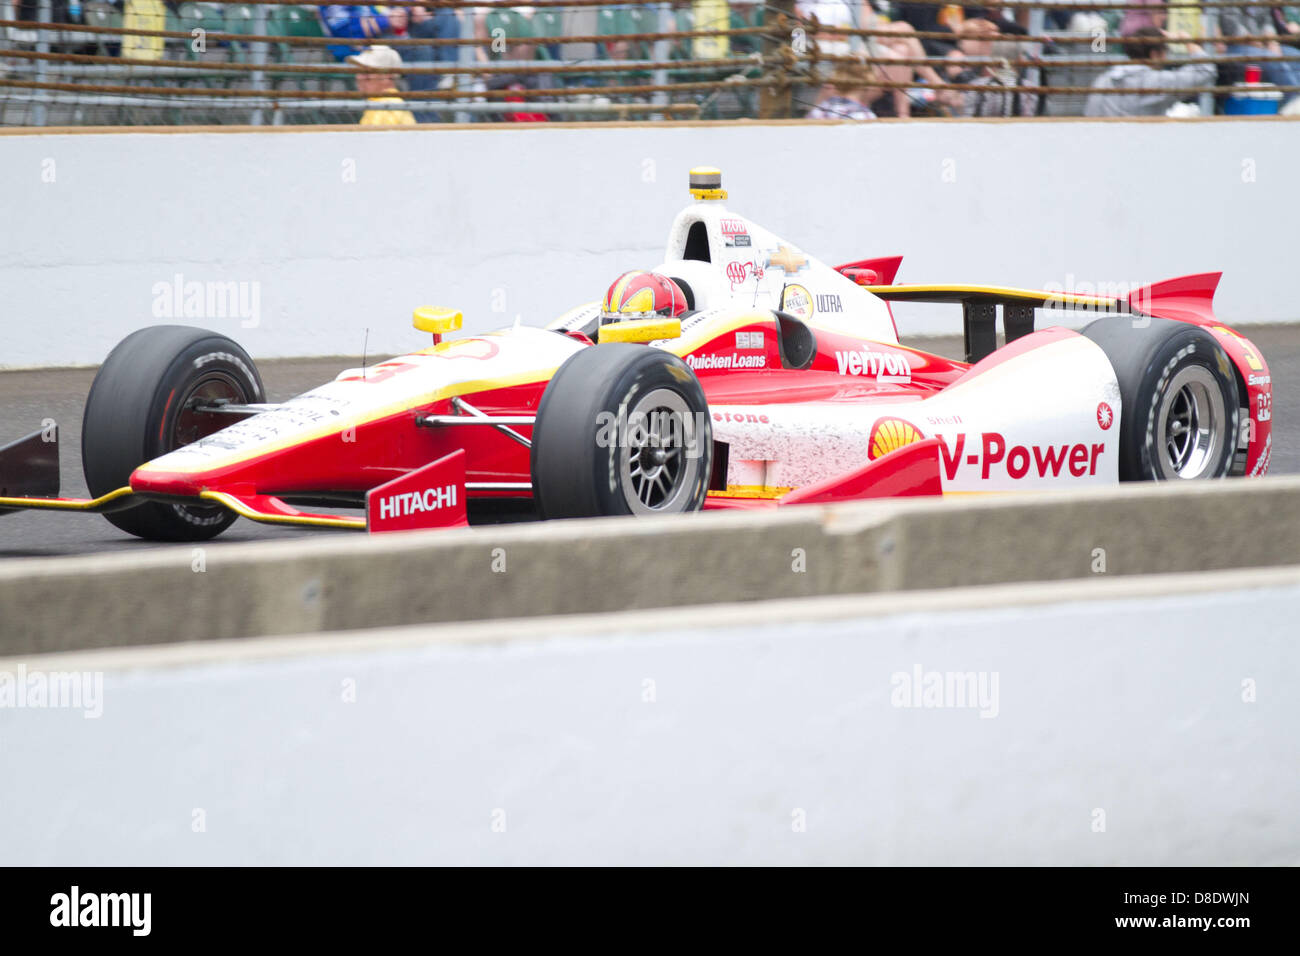 May 26, 2013 - Indianapolis, IN - May 26, 2013: Helio Castroneves (3) heads into Turn 1 during the Indianapolis 500 at the Indianapolis Motor Speedway in Speedway, IN Stock Photo